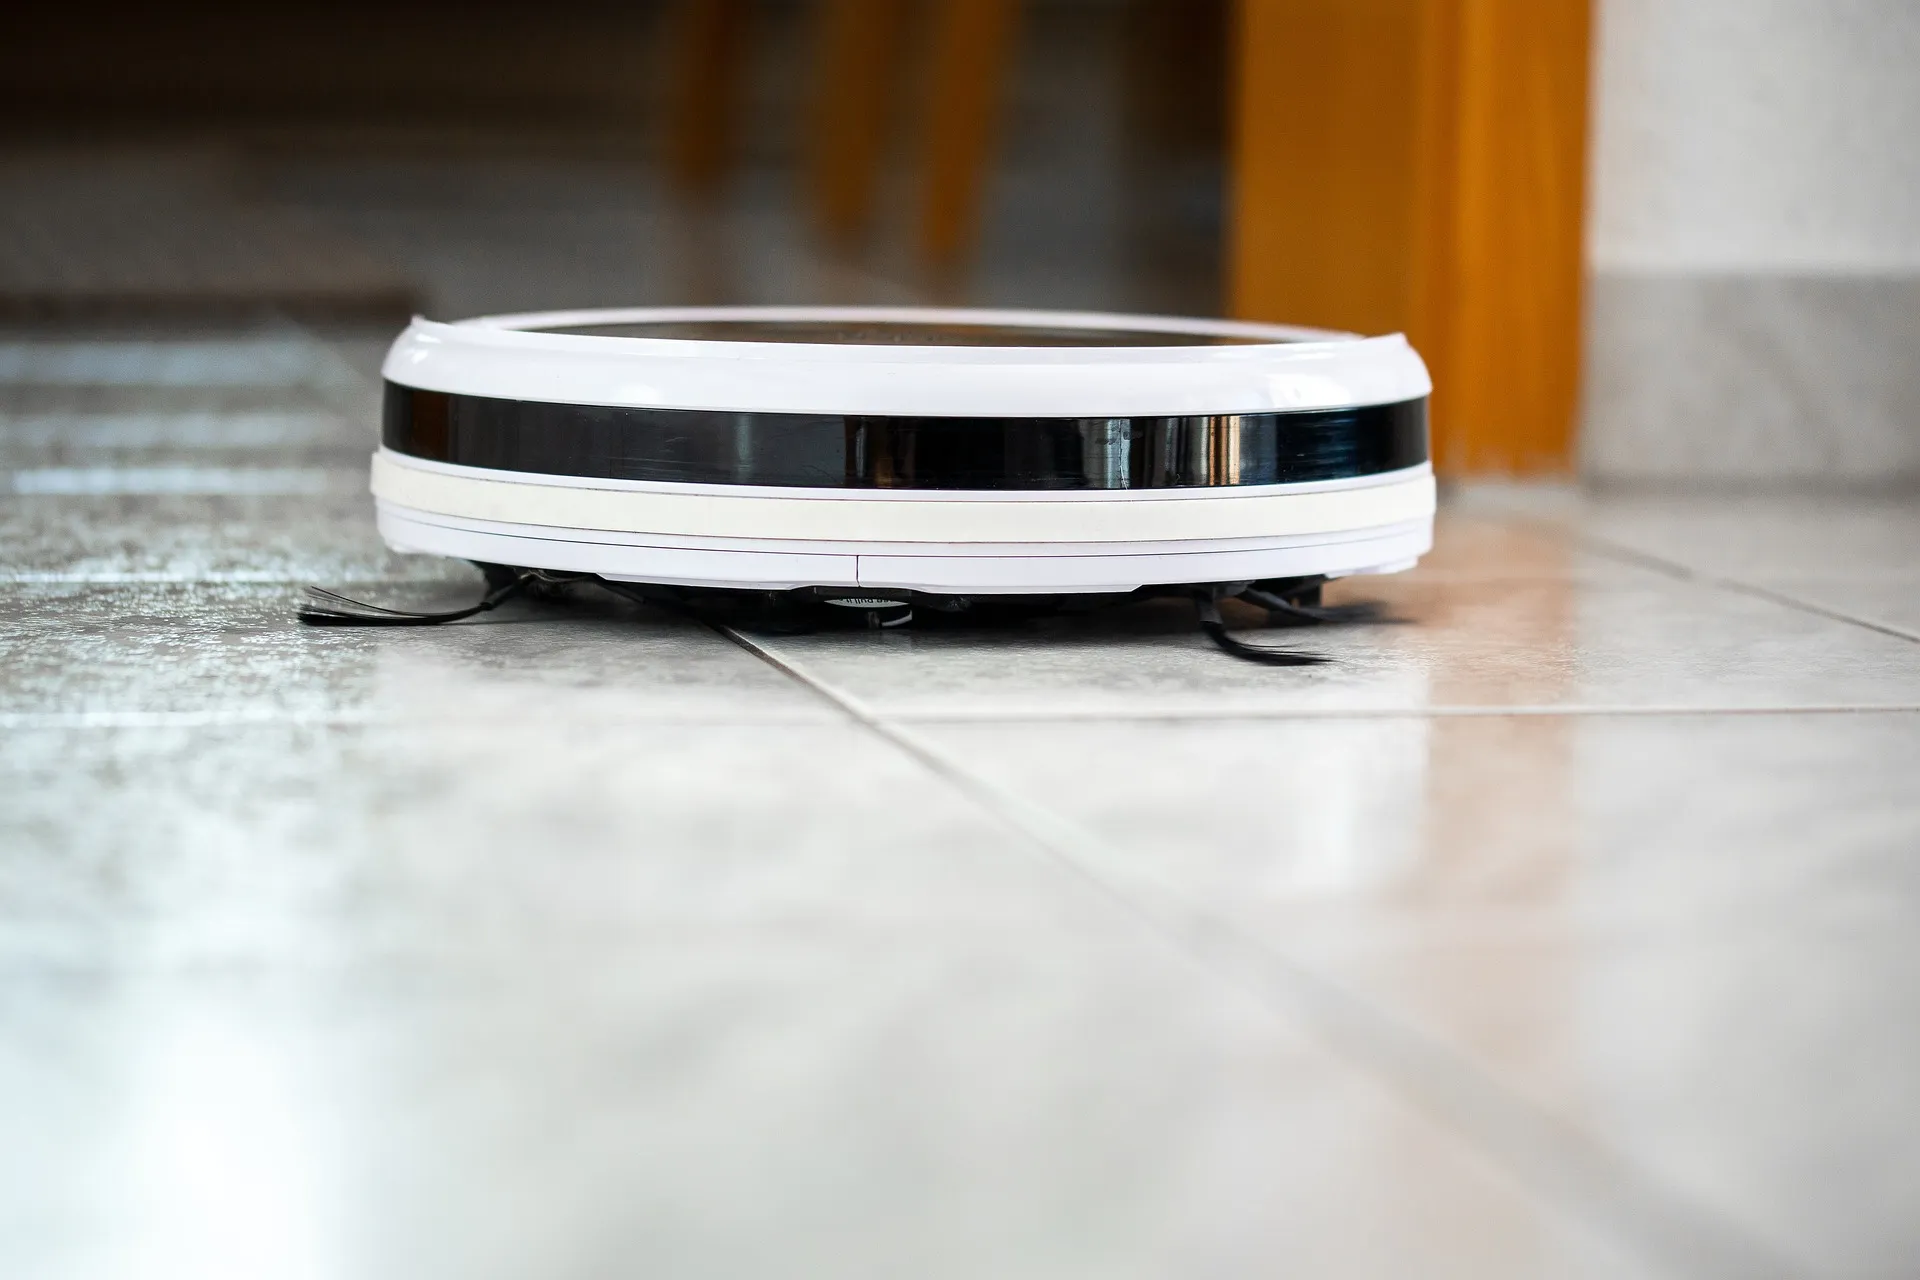 Automate your cleaning with robotic vacuum cleaner.